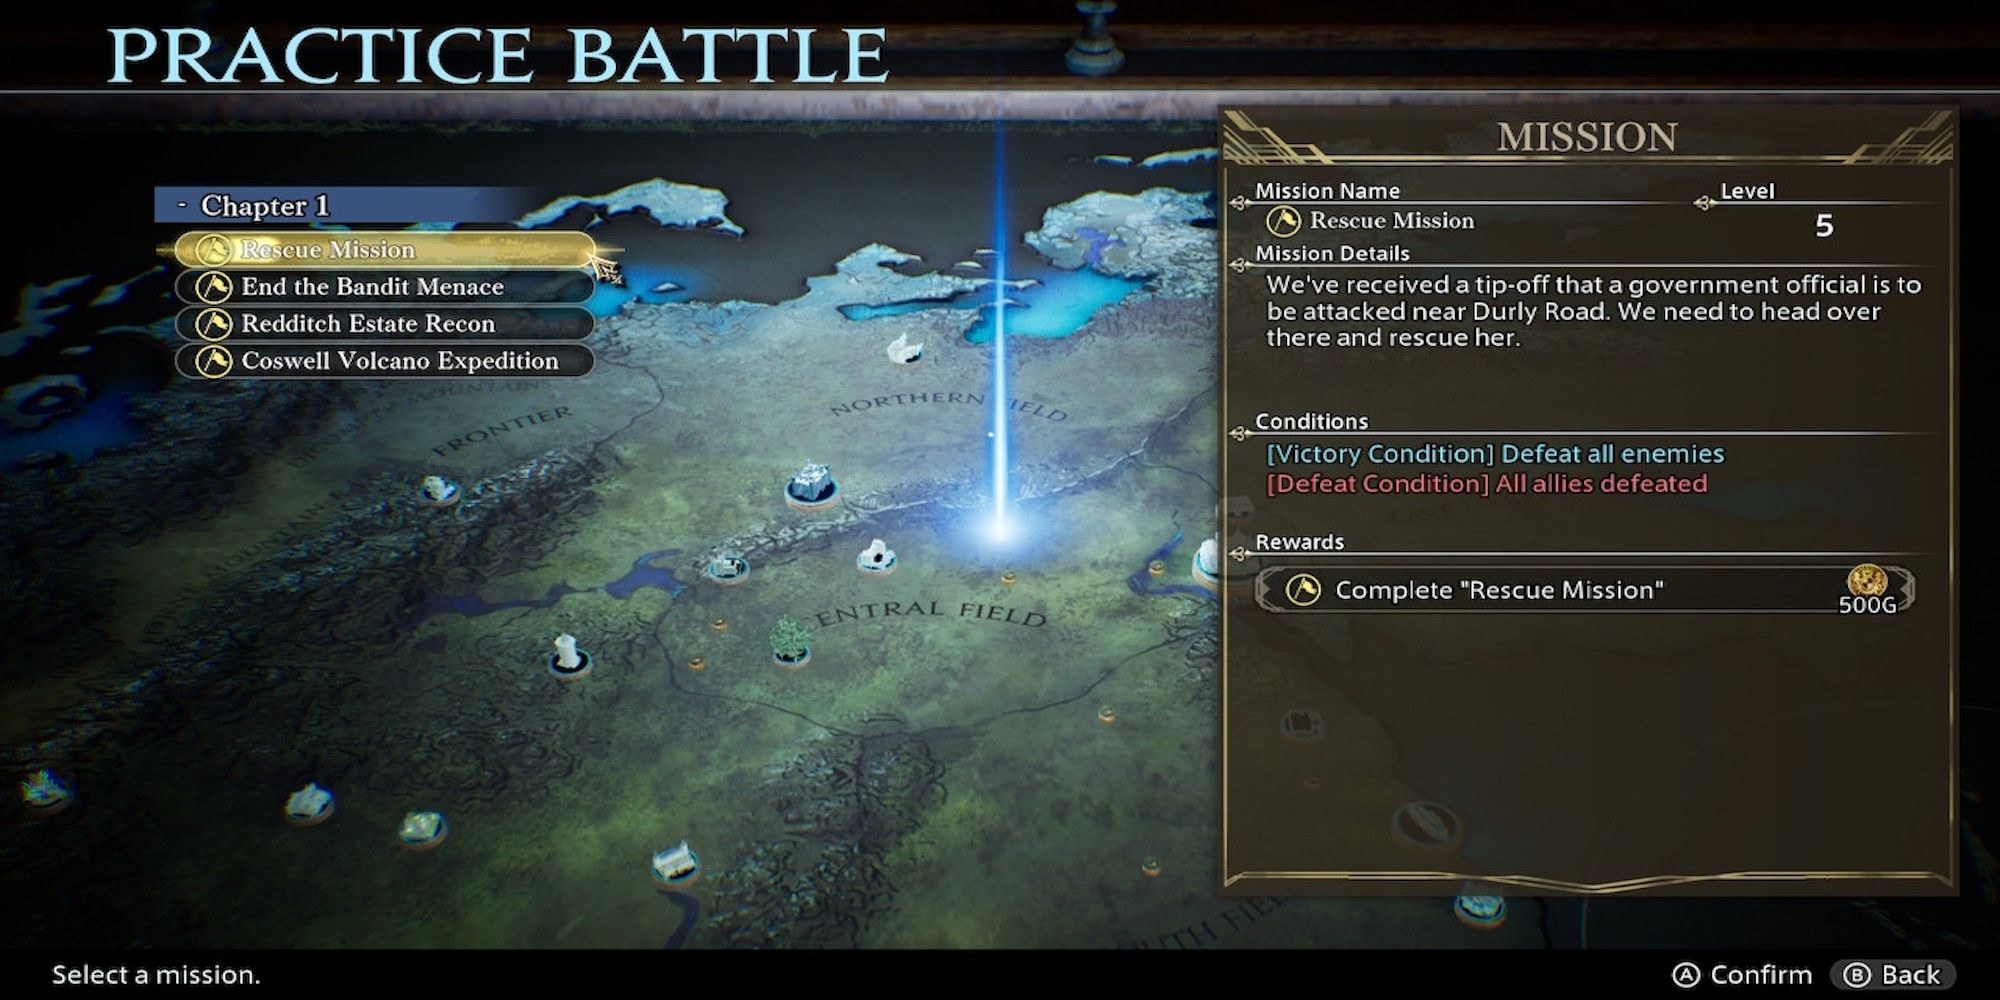 The practice battle menu in The Diofield Chronicle